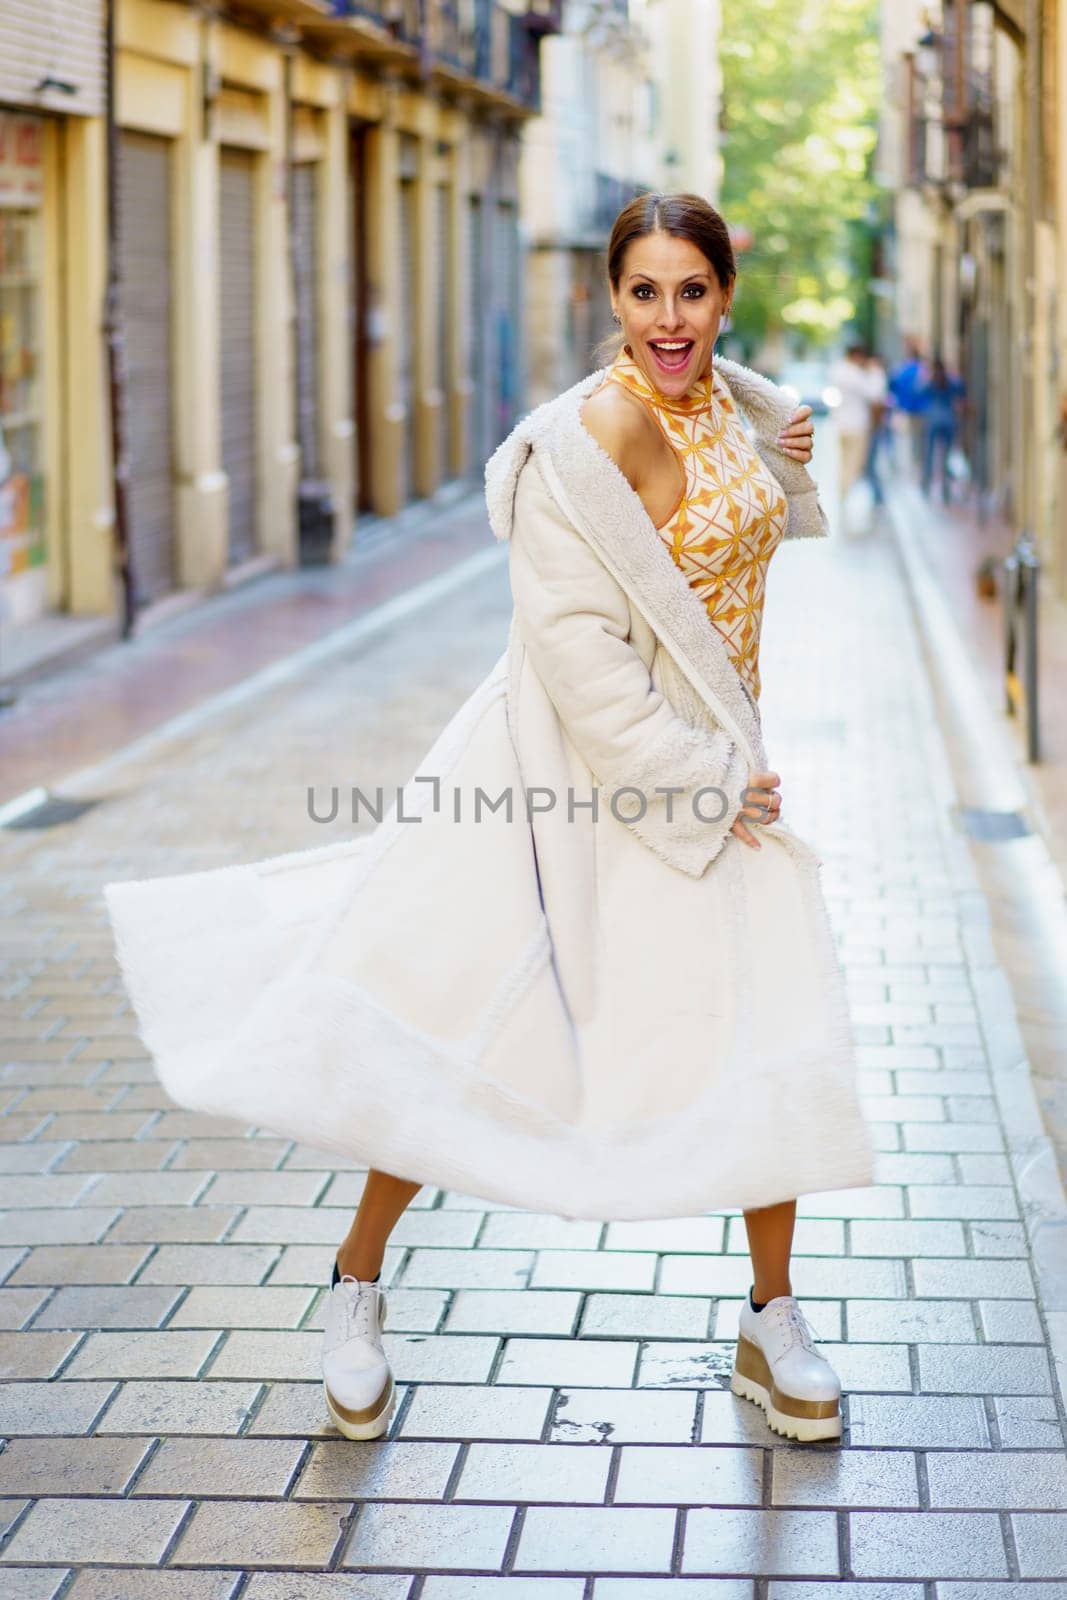 Content stylish woman in fashionable dress and coat standing on street against buildings by javiindy